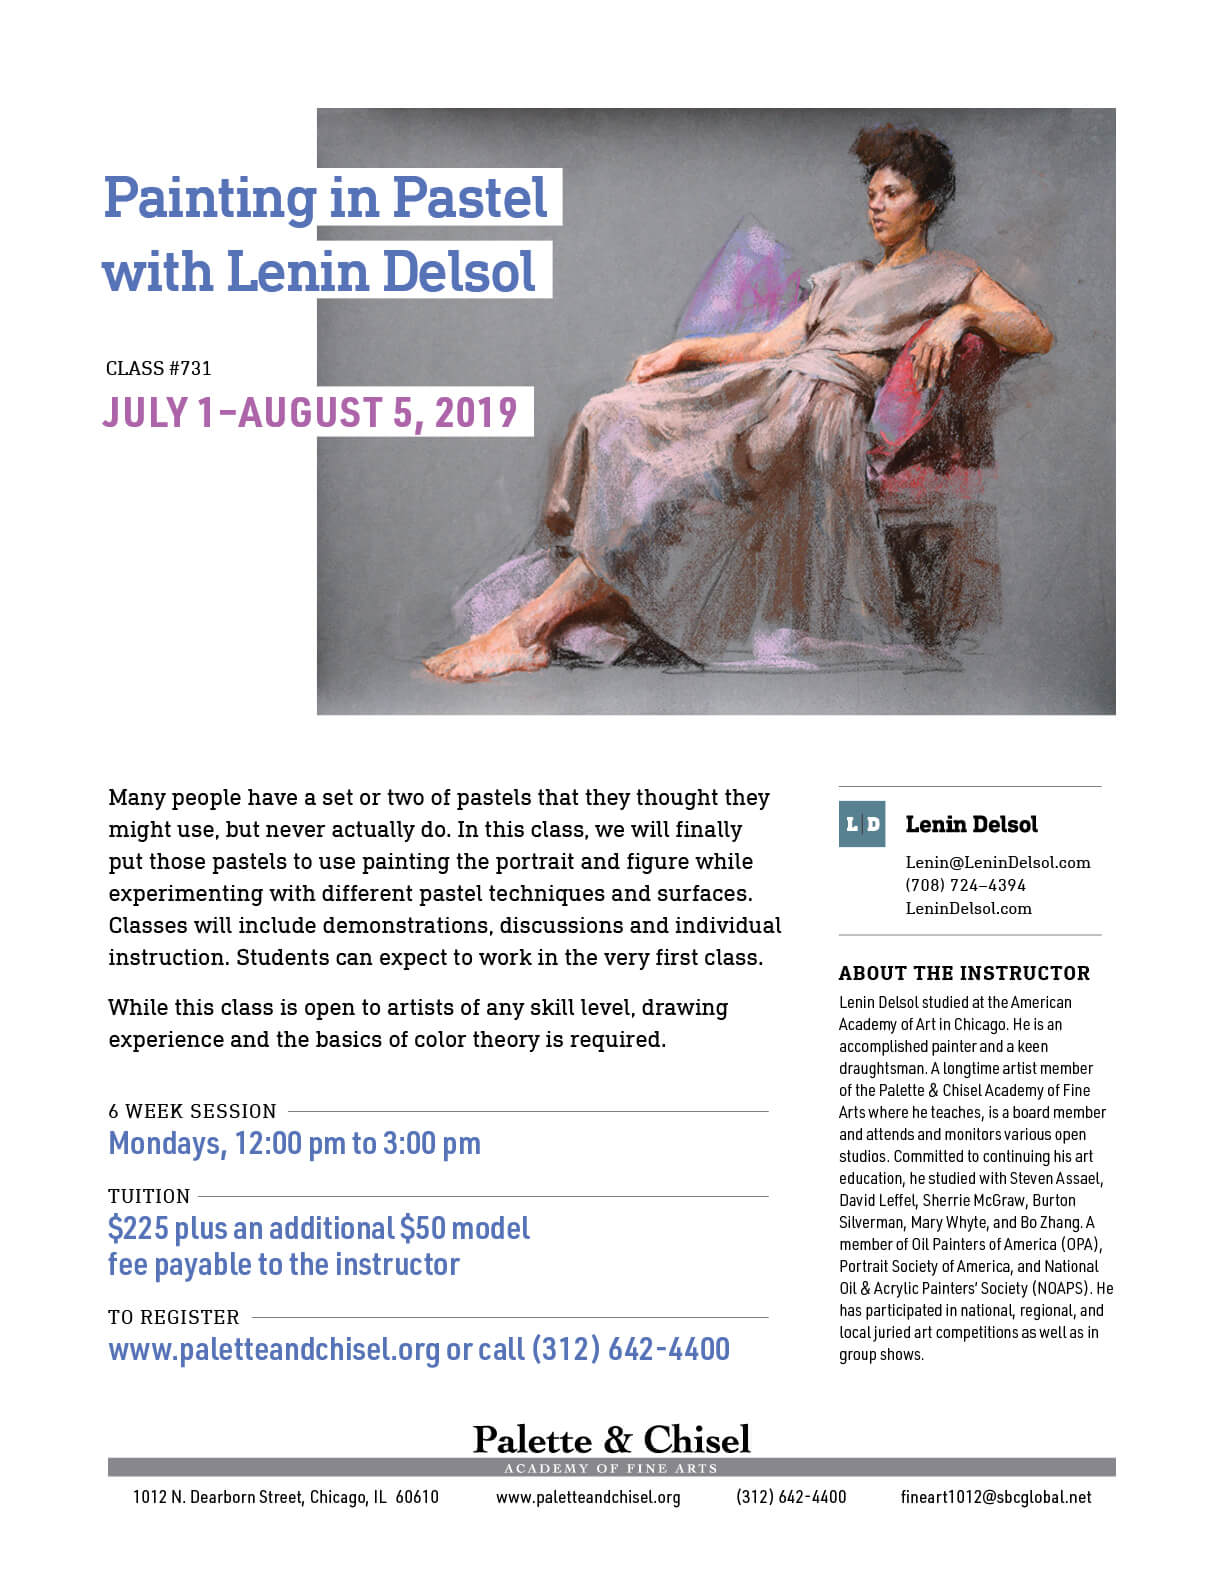 Pastel Painting class flyer with class description, dates, cost and pastel painting of a woman in repose